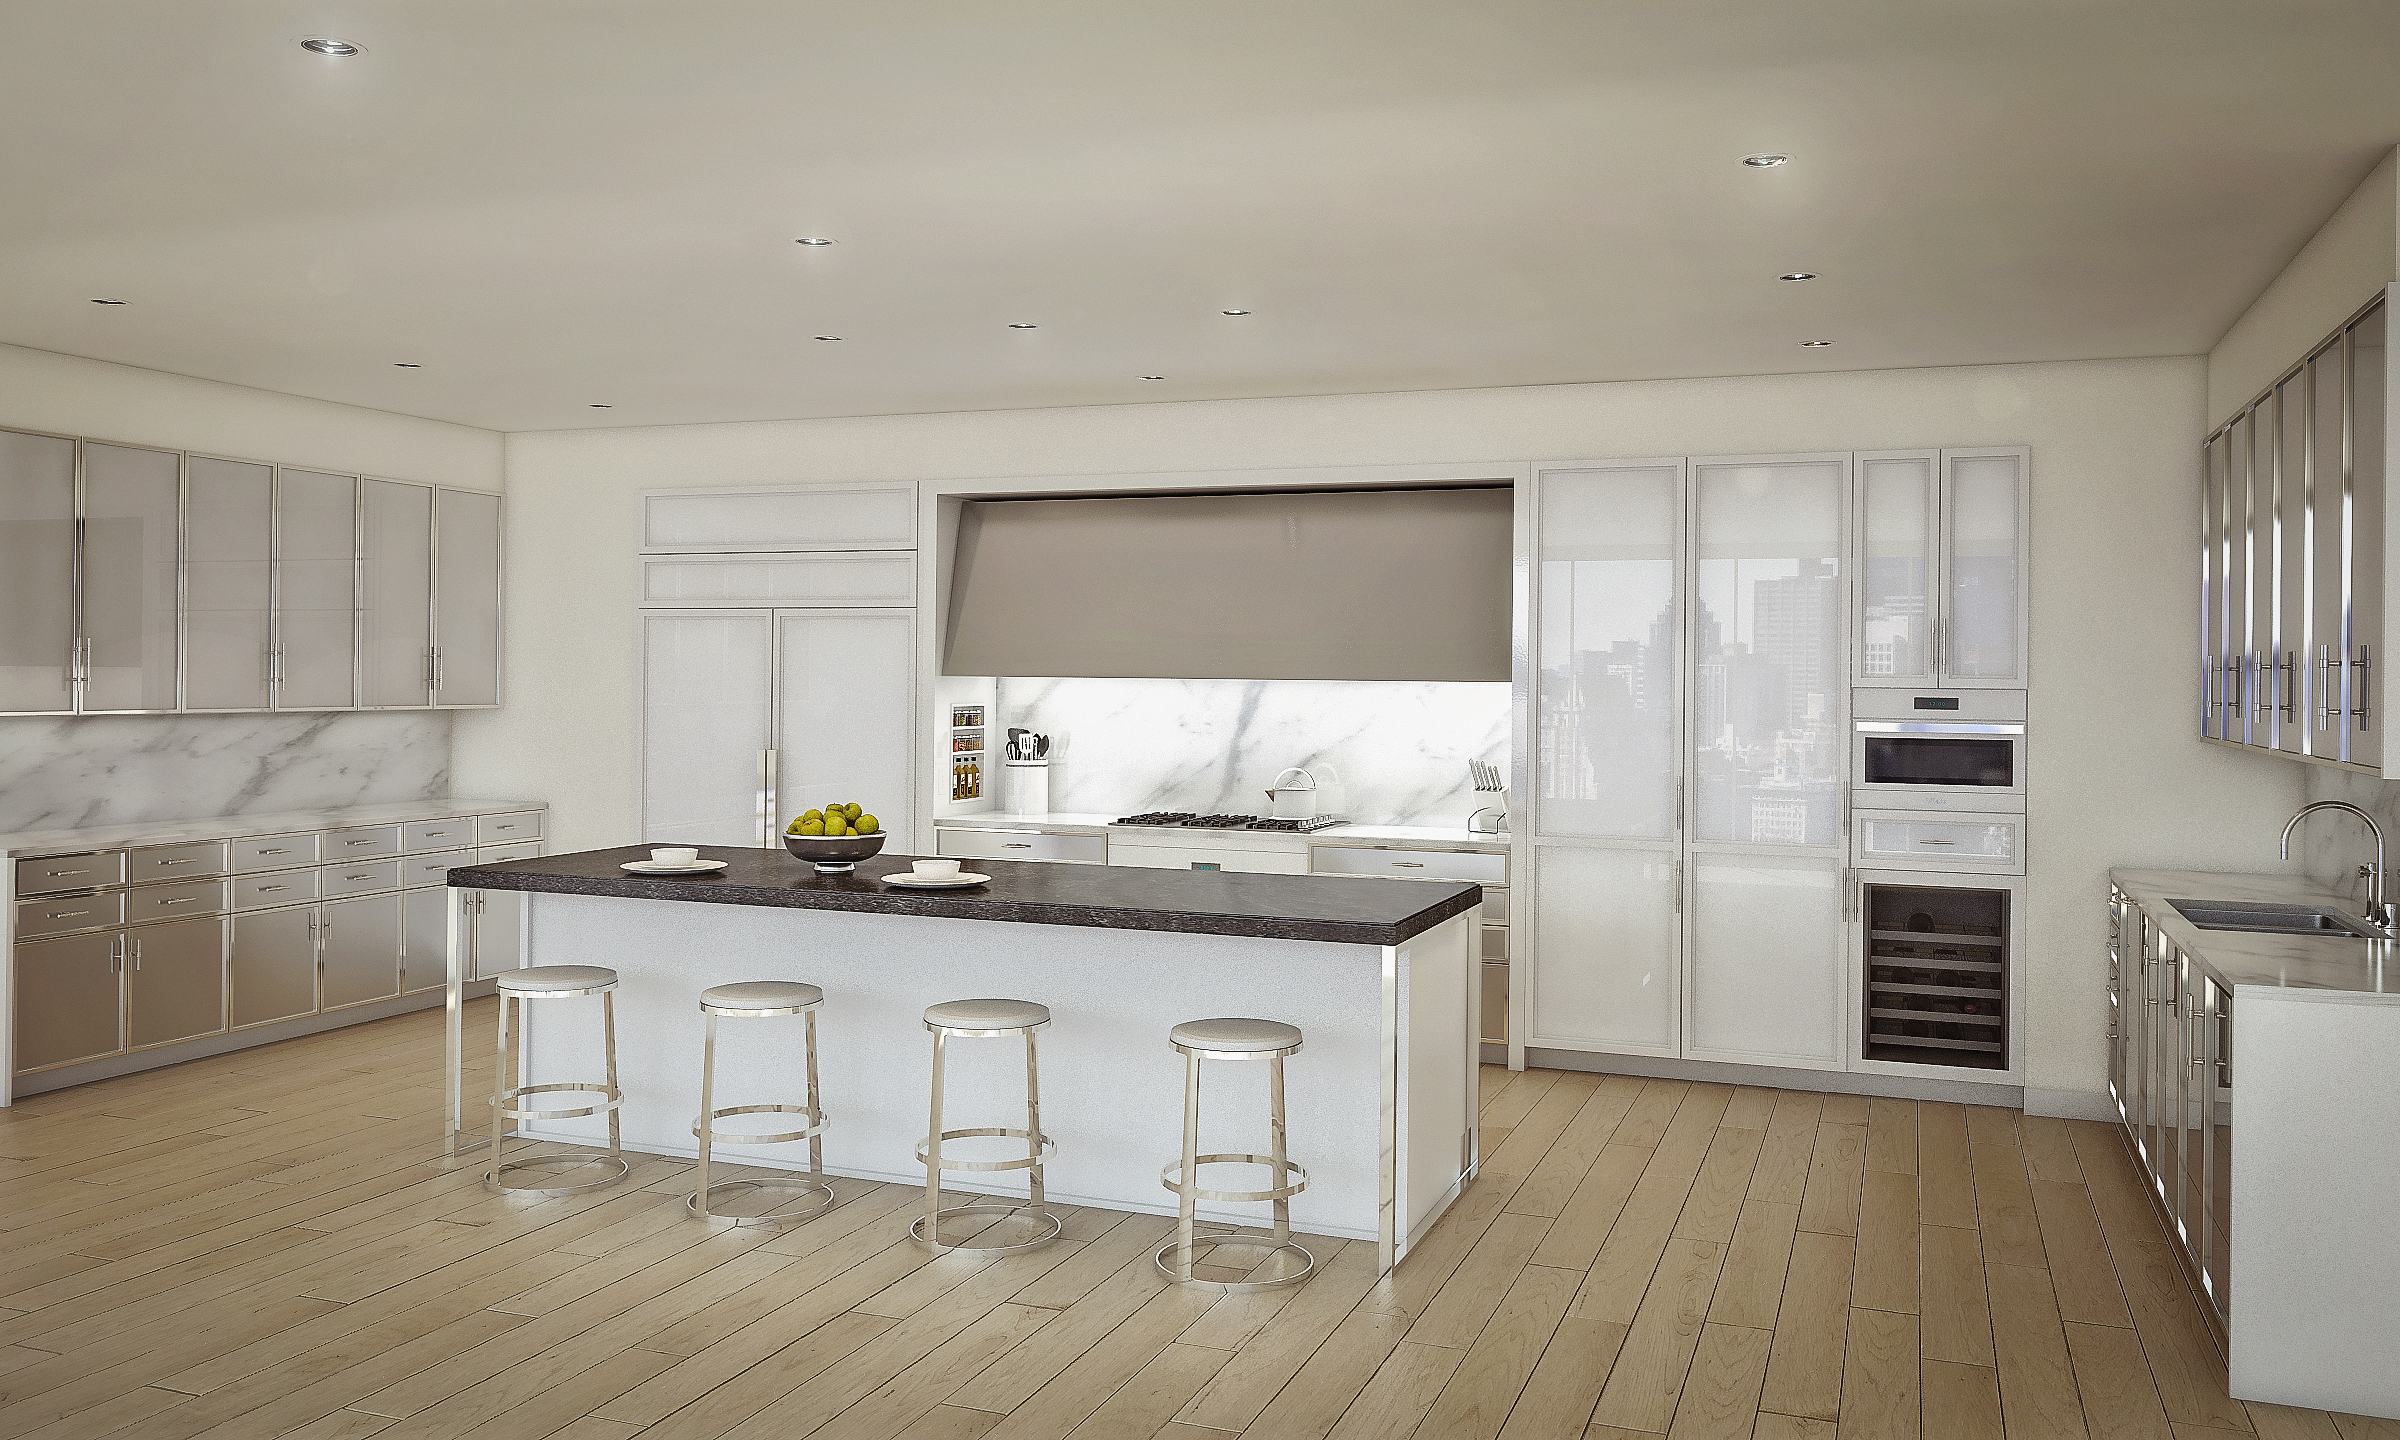 ARCHITECTURAL IMAGERY_IRP KITCHENS__05.jpg